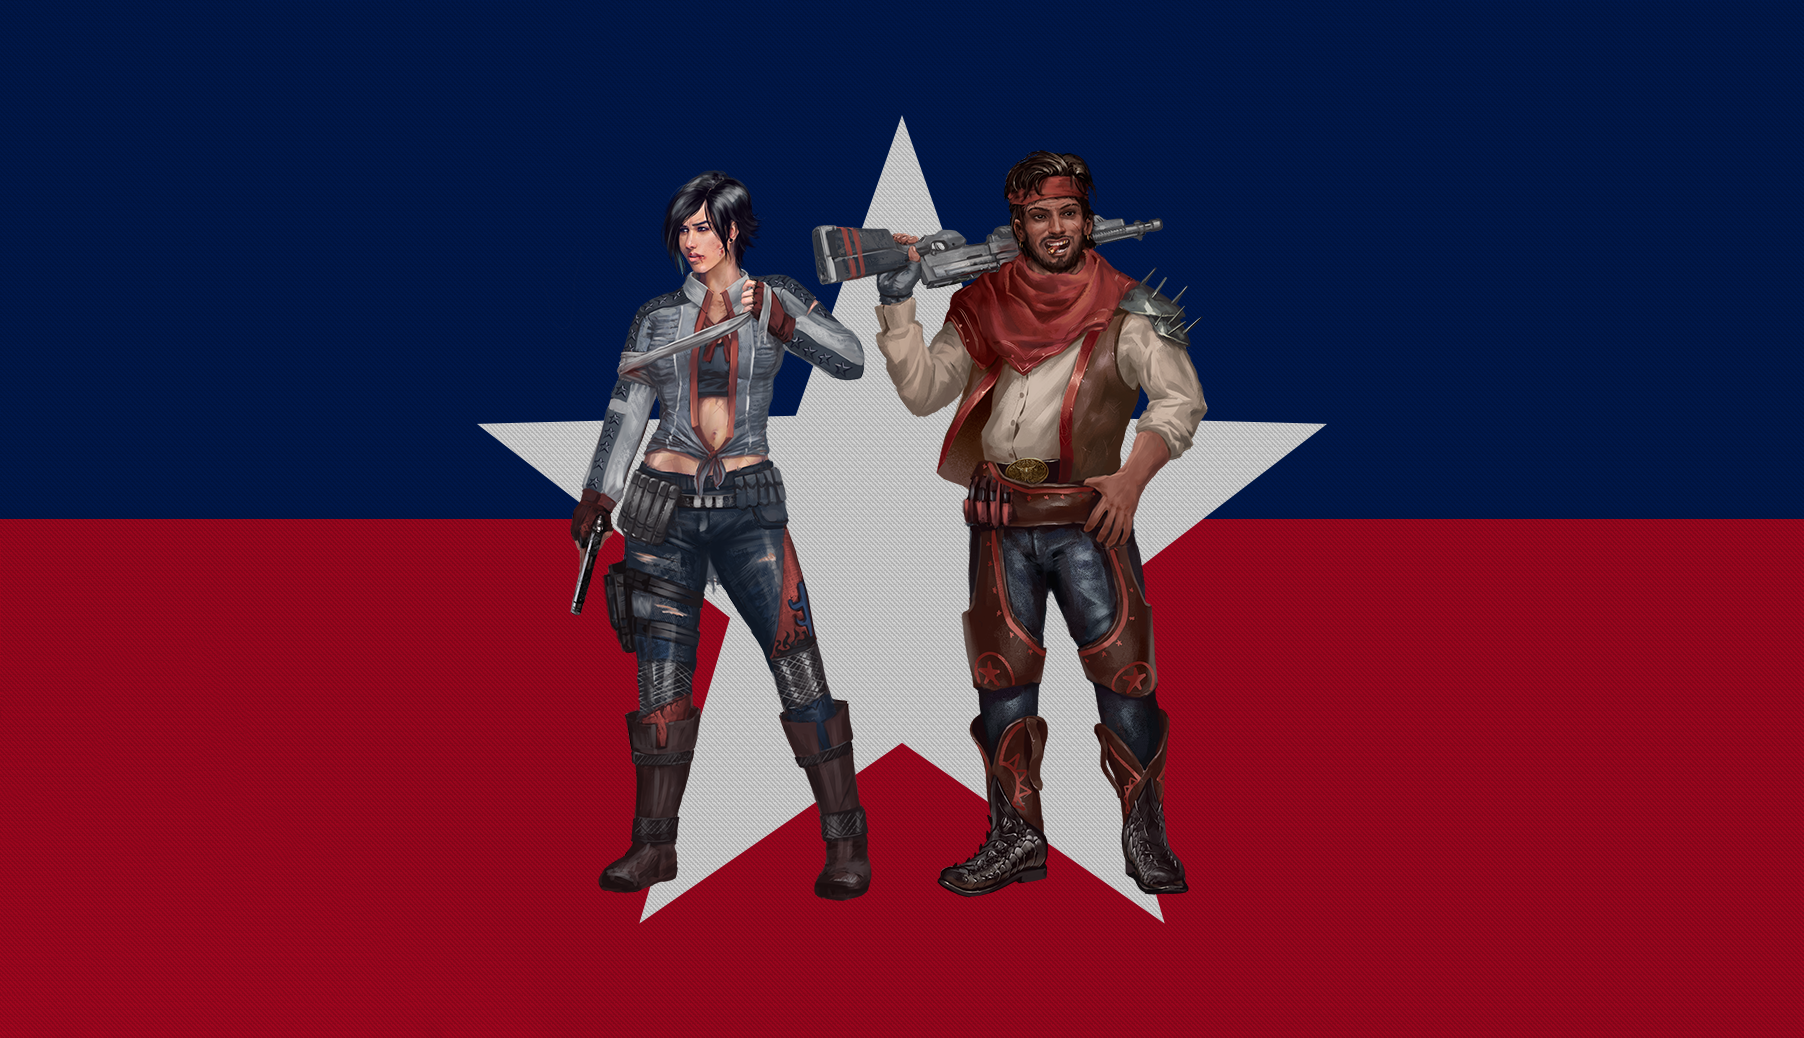 Eden_Falling_FactionFlags_M&F_Texas_Star